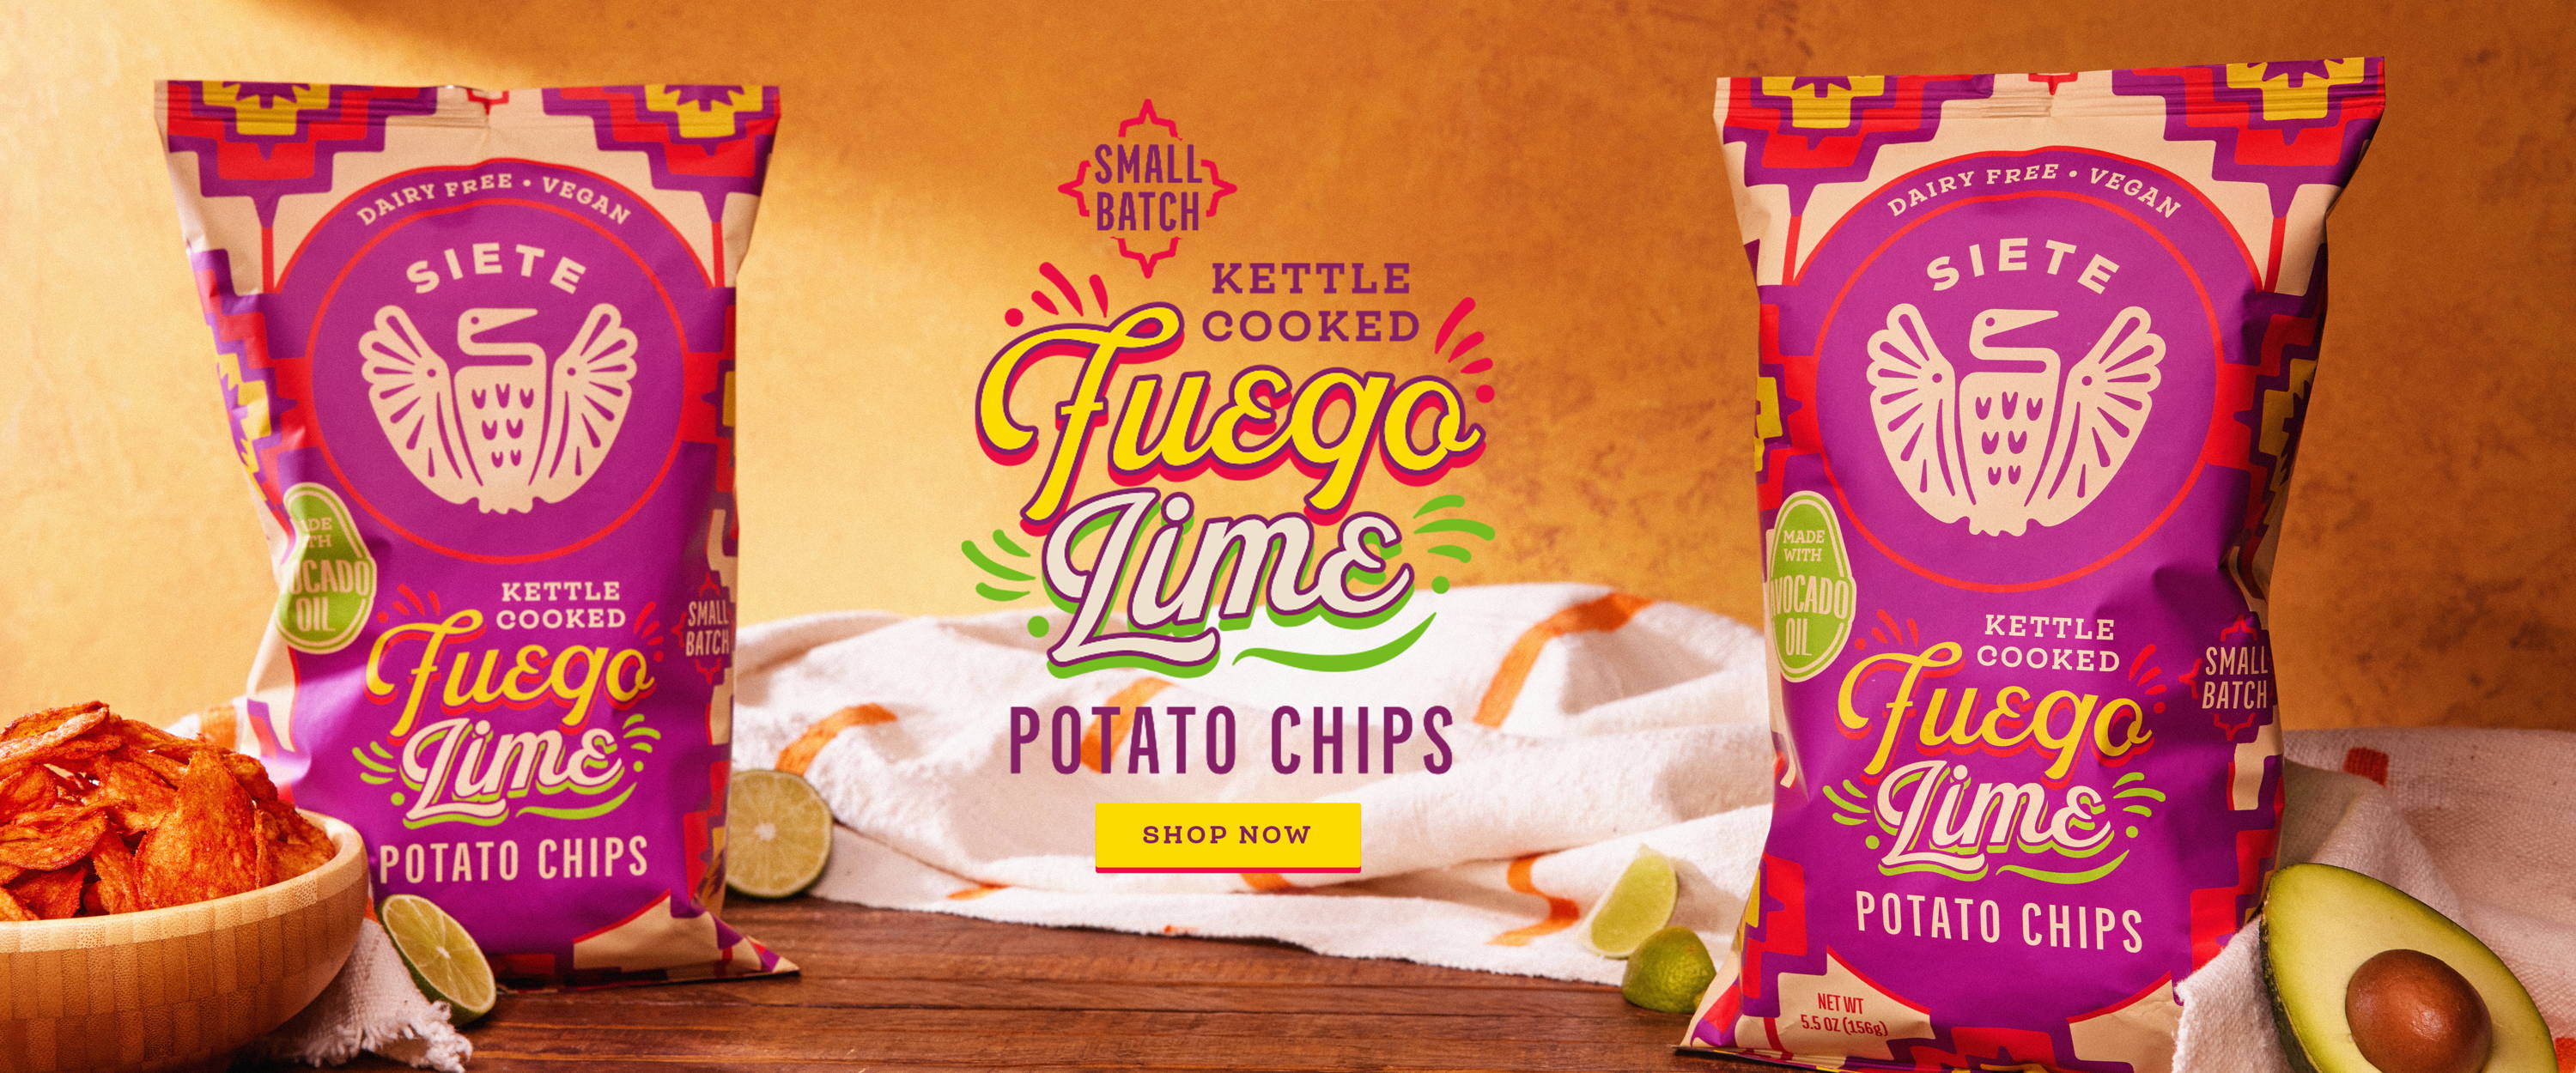 Small Batch Kettle Cooked Fuego Lime potato chips Shop now